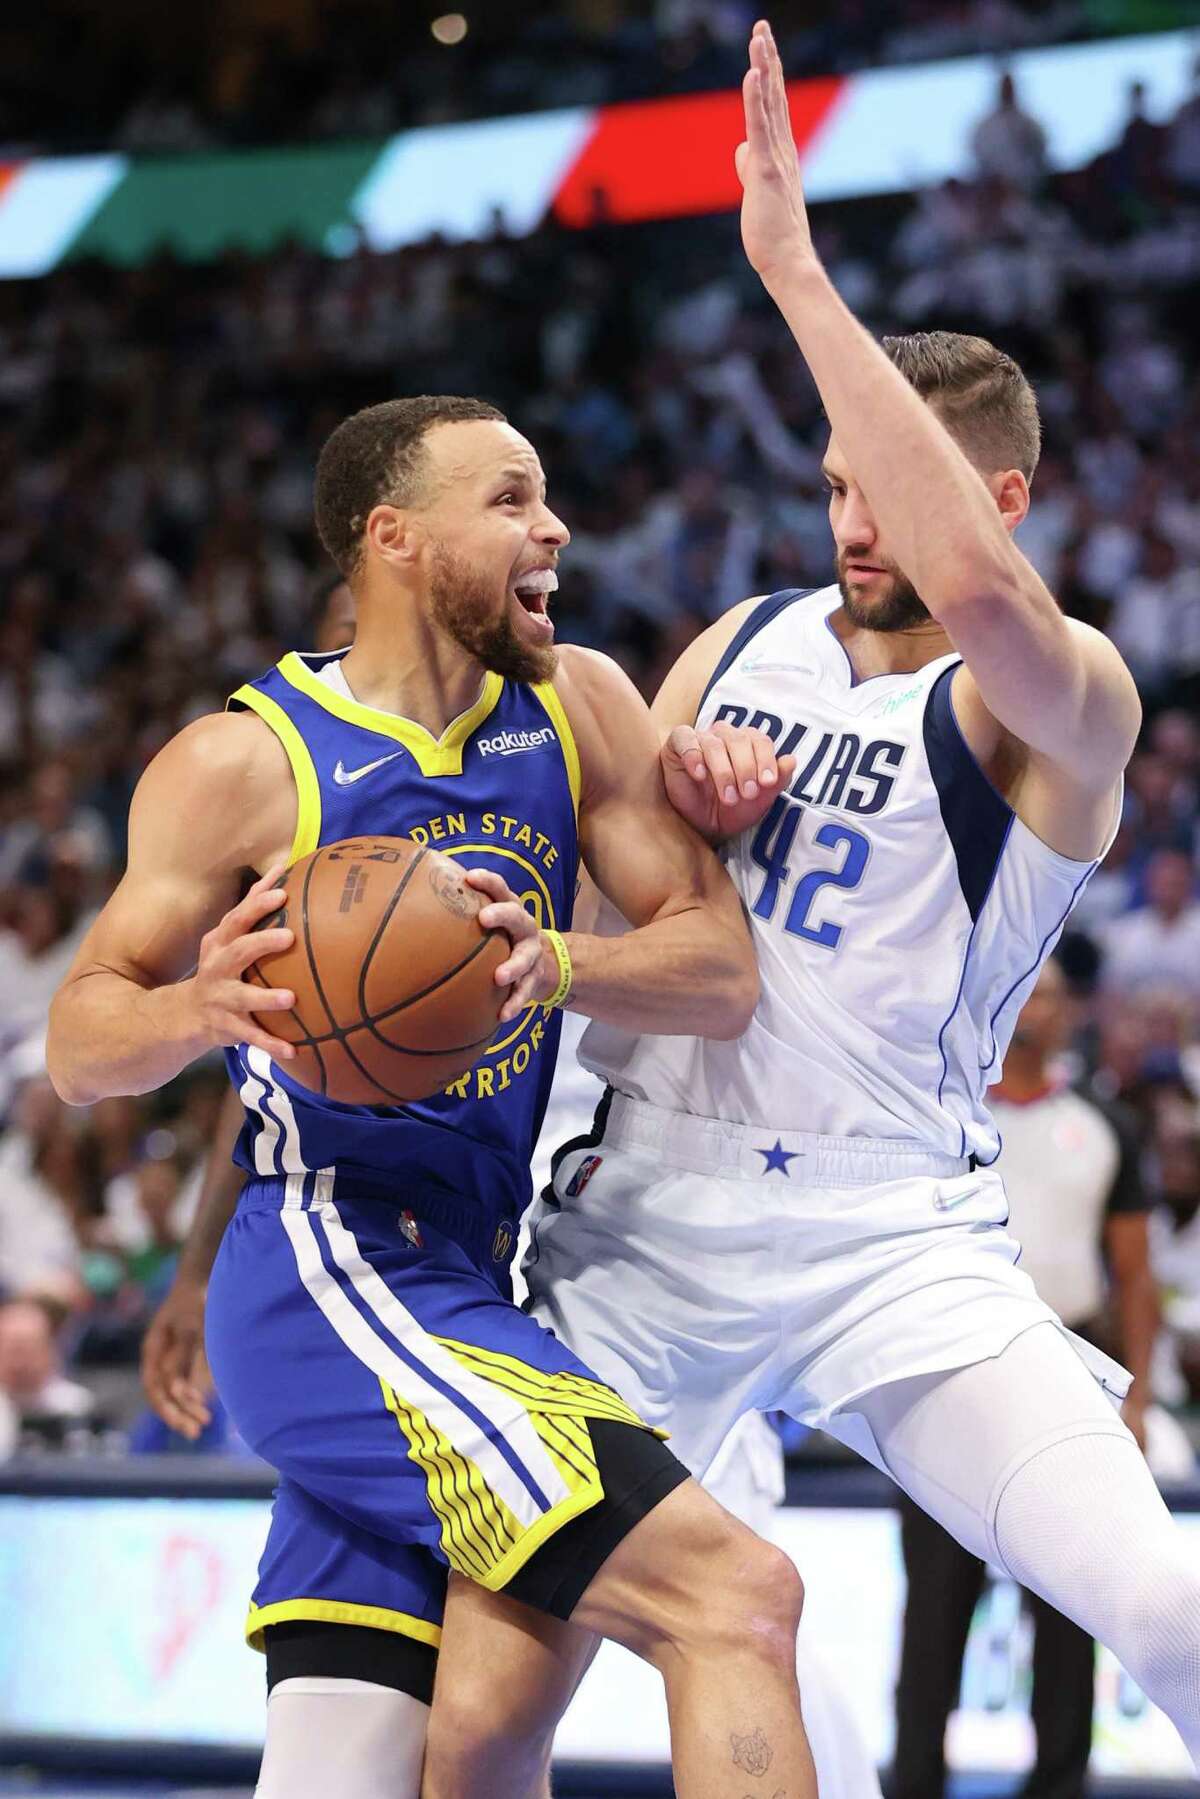 Golden State Warriors’ Stephen Curry drives against Dallas Mavericks’ Maxi Kleber in 1st quarter of Game 4 of NBA Western Conference Finals at American Airlines Center in Dallas, Texas, on Tuesday, May 24, 2022.